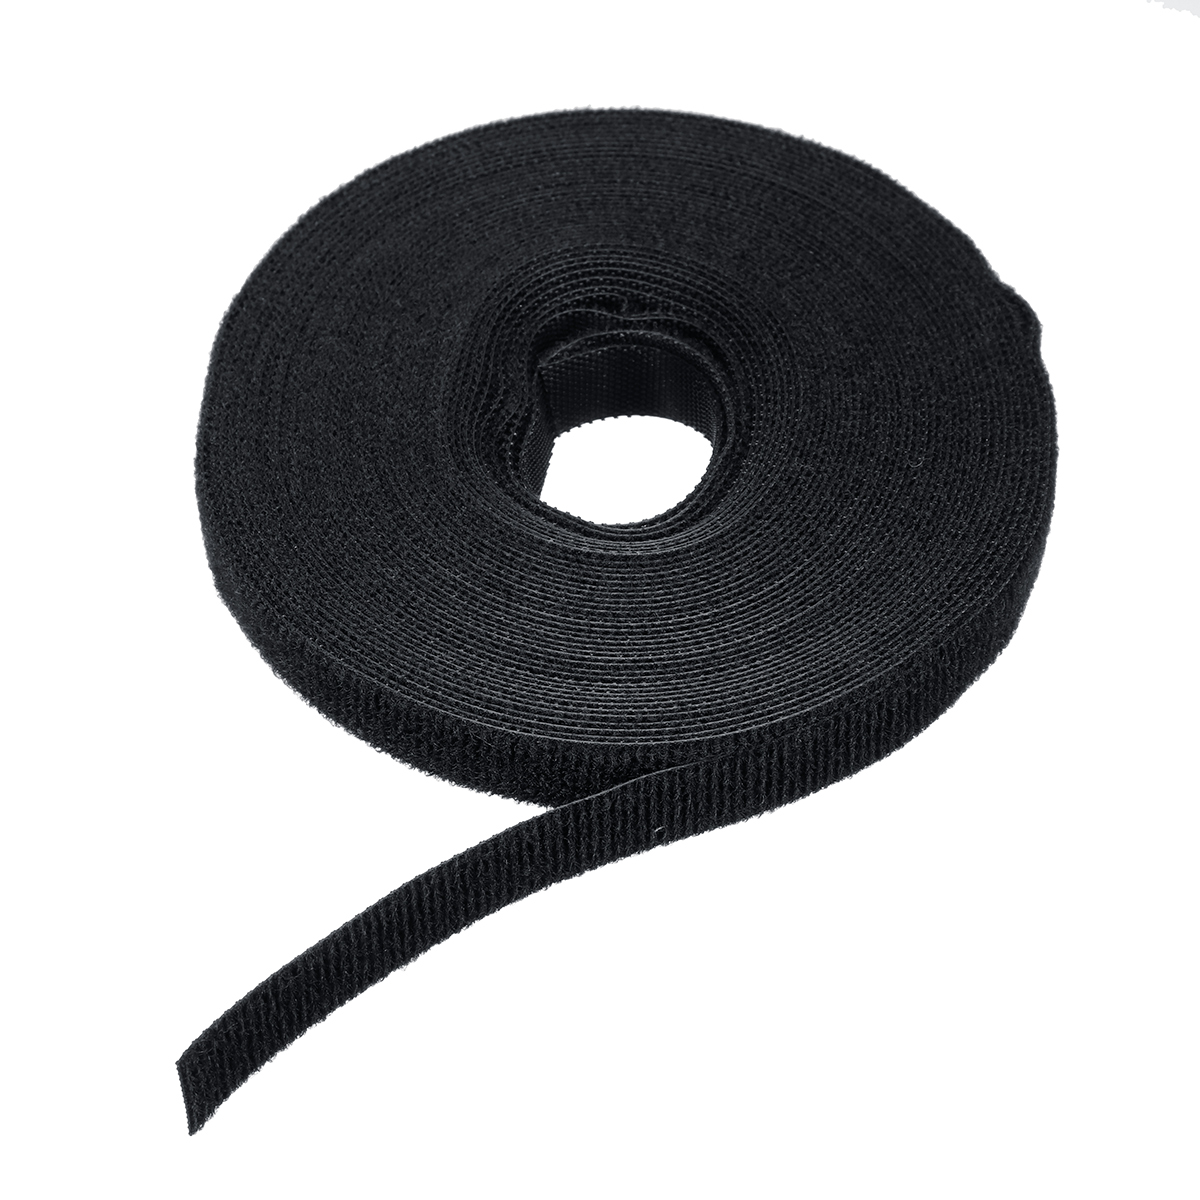 10m-Nylon-Cable-Ties-Wrap-Ties-Fastening-Cables-Wire-Cable-Line-Holder-Winder-Clip-1558531-10